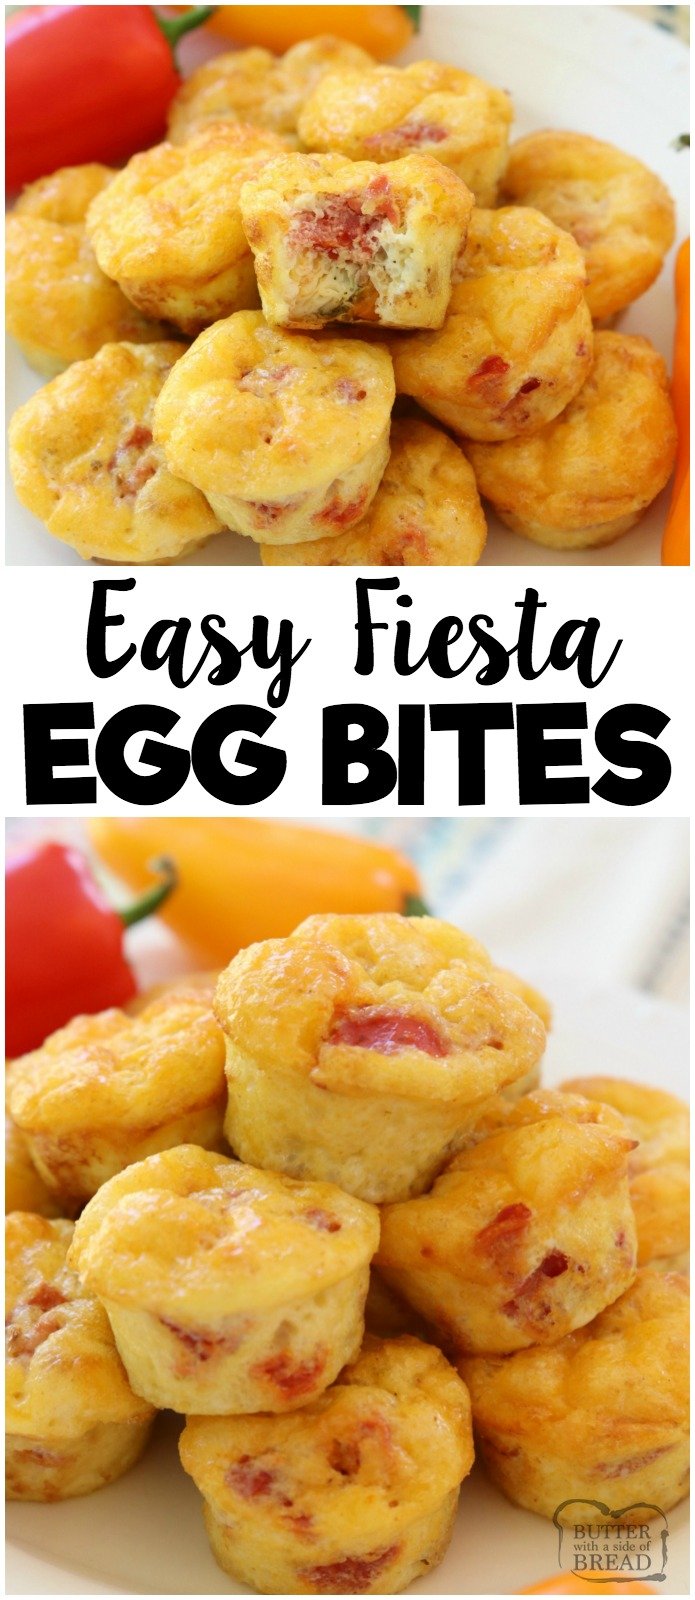 Fiesta Egg Bites are perfect for a hearty & flavorful breakfast, lunch or dinner! Simple recipe made with eggs, tomatoes, cheese and baked into bite-sized portions. Ready in under 30 minutes! #breakfast #dinner #meatless #protein #eggs #food #recipe from BUTTER WITH A SIDE OF BREAD